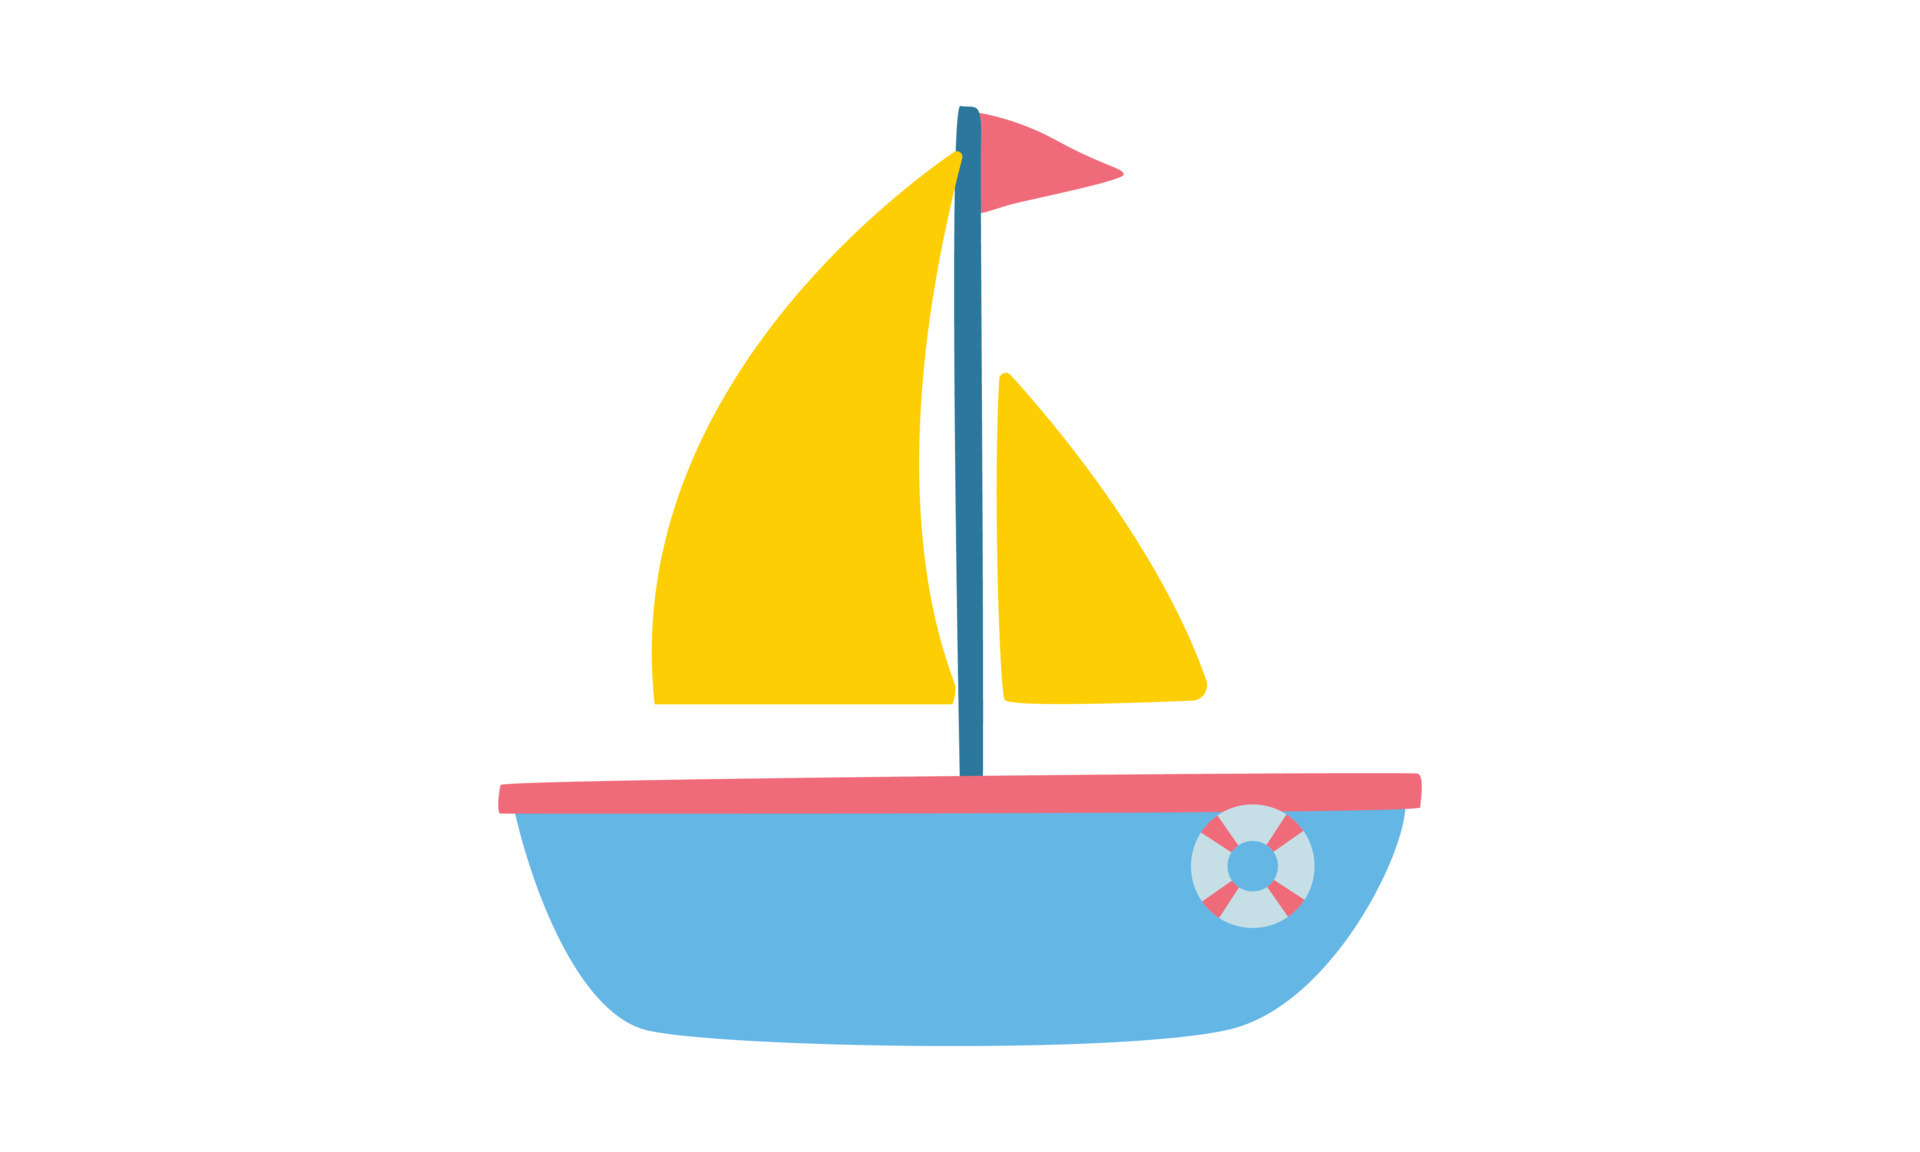 Cute cartoon sailboat clipart. Simple sail boat flat vector illustration.  Minimalist boat with sail, flag and life ring cartoon style icon. Baby boat  toy hand drawn vector design. Kid bath toy concept